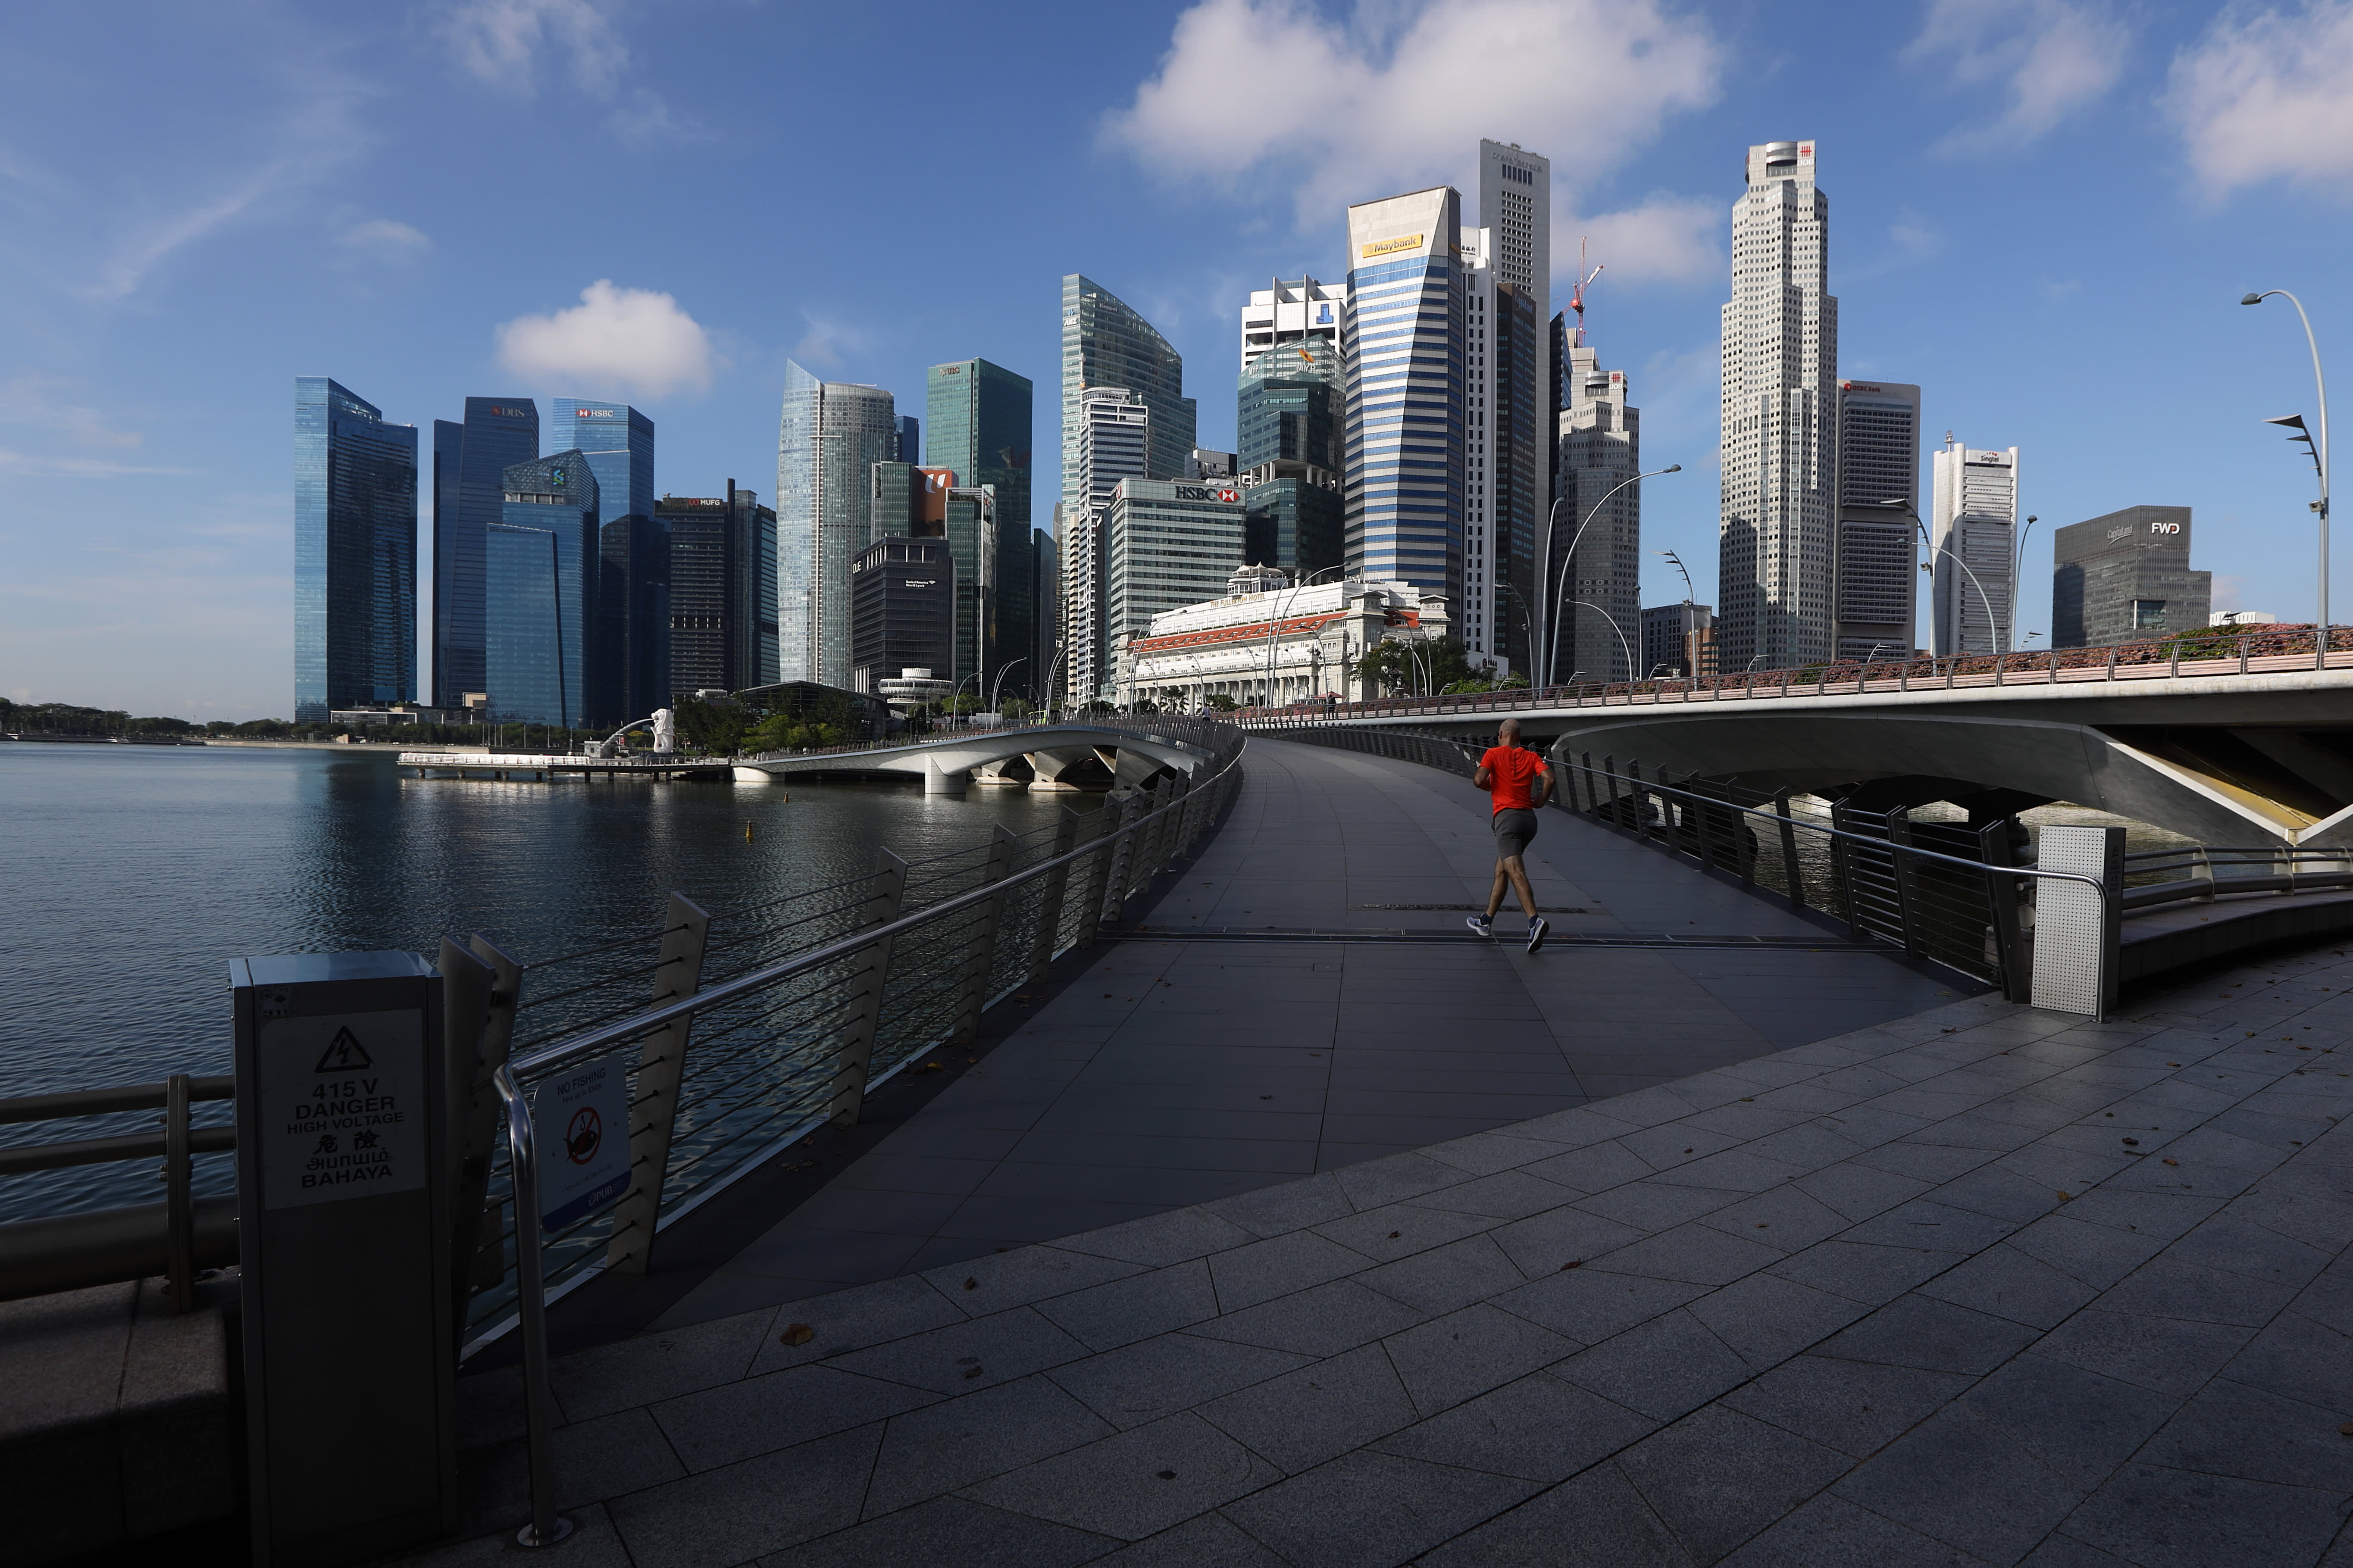 Singapore's economy grew at a faster pace in the third quarter than initial estimate